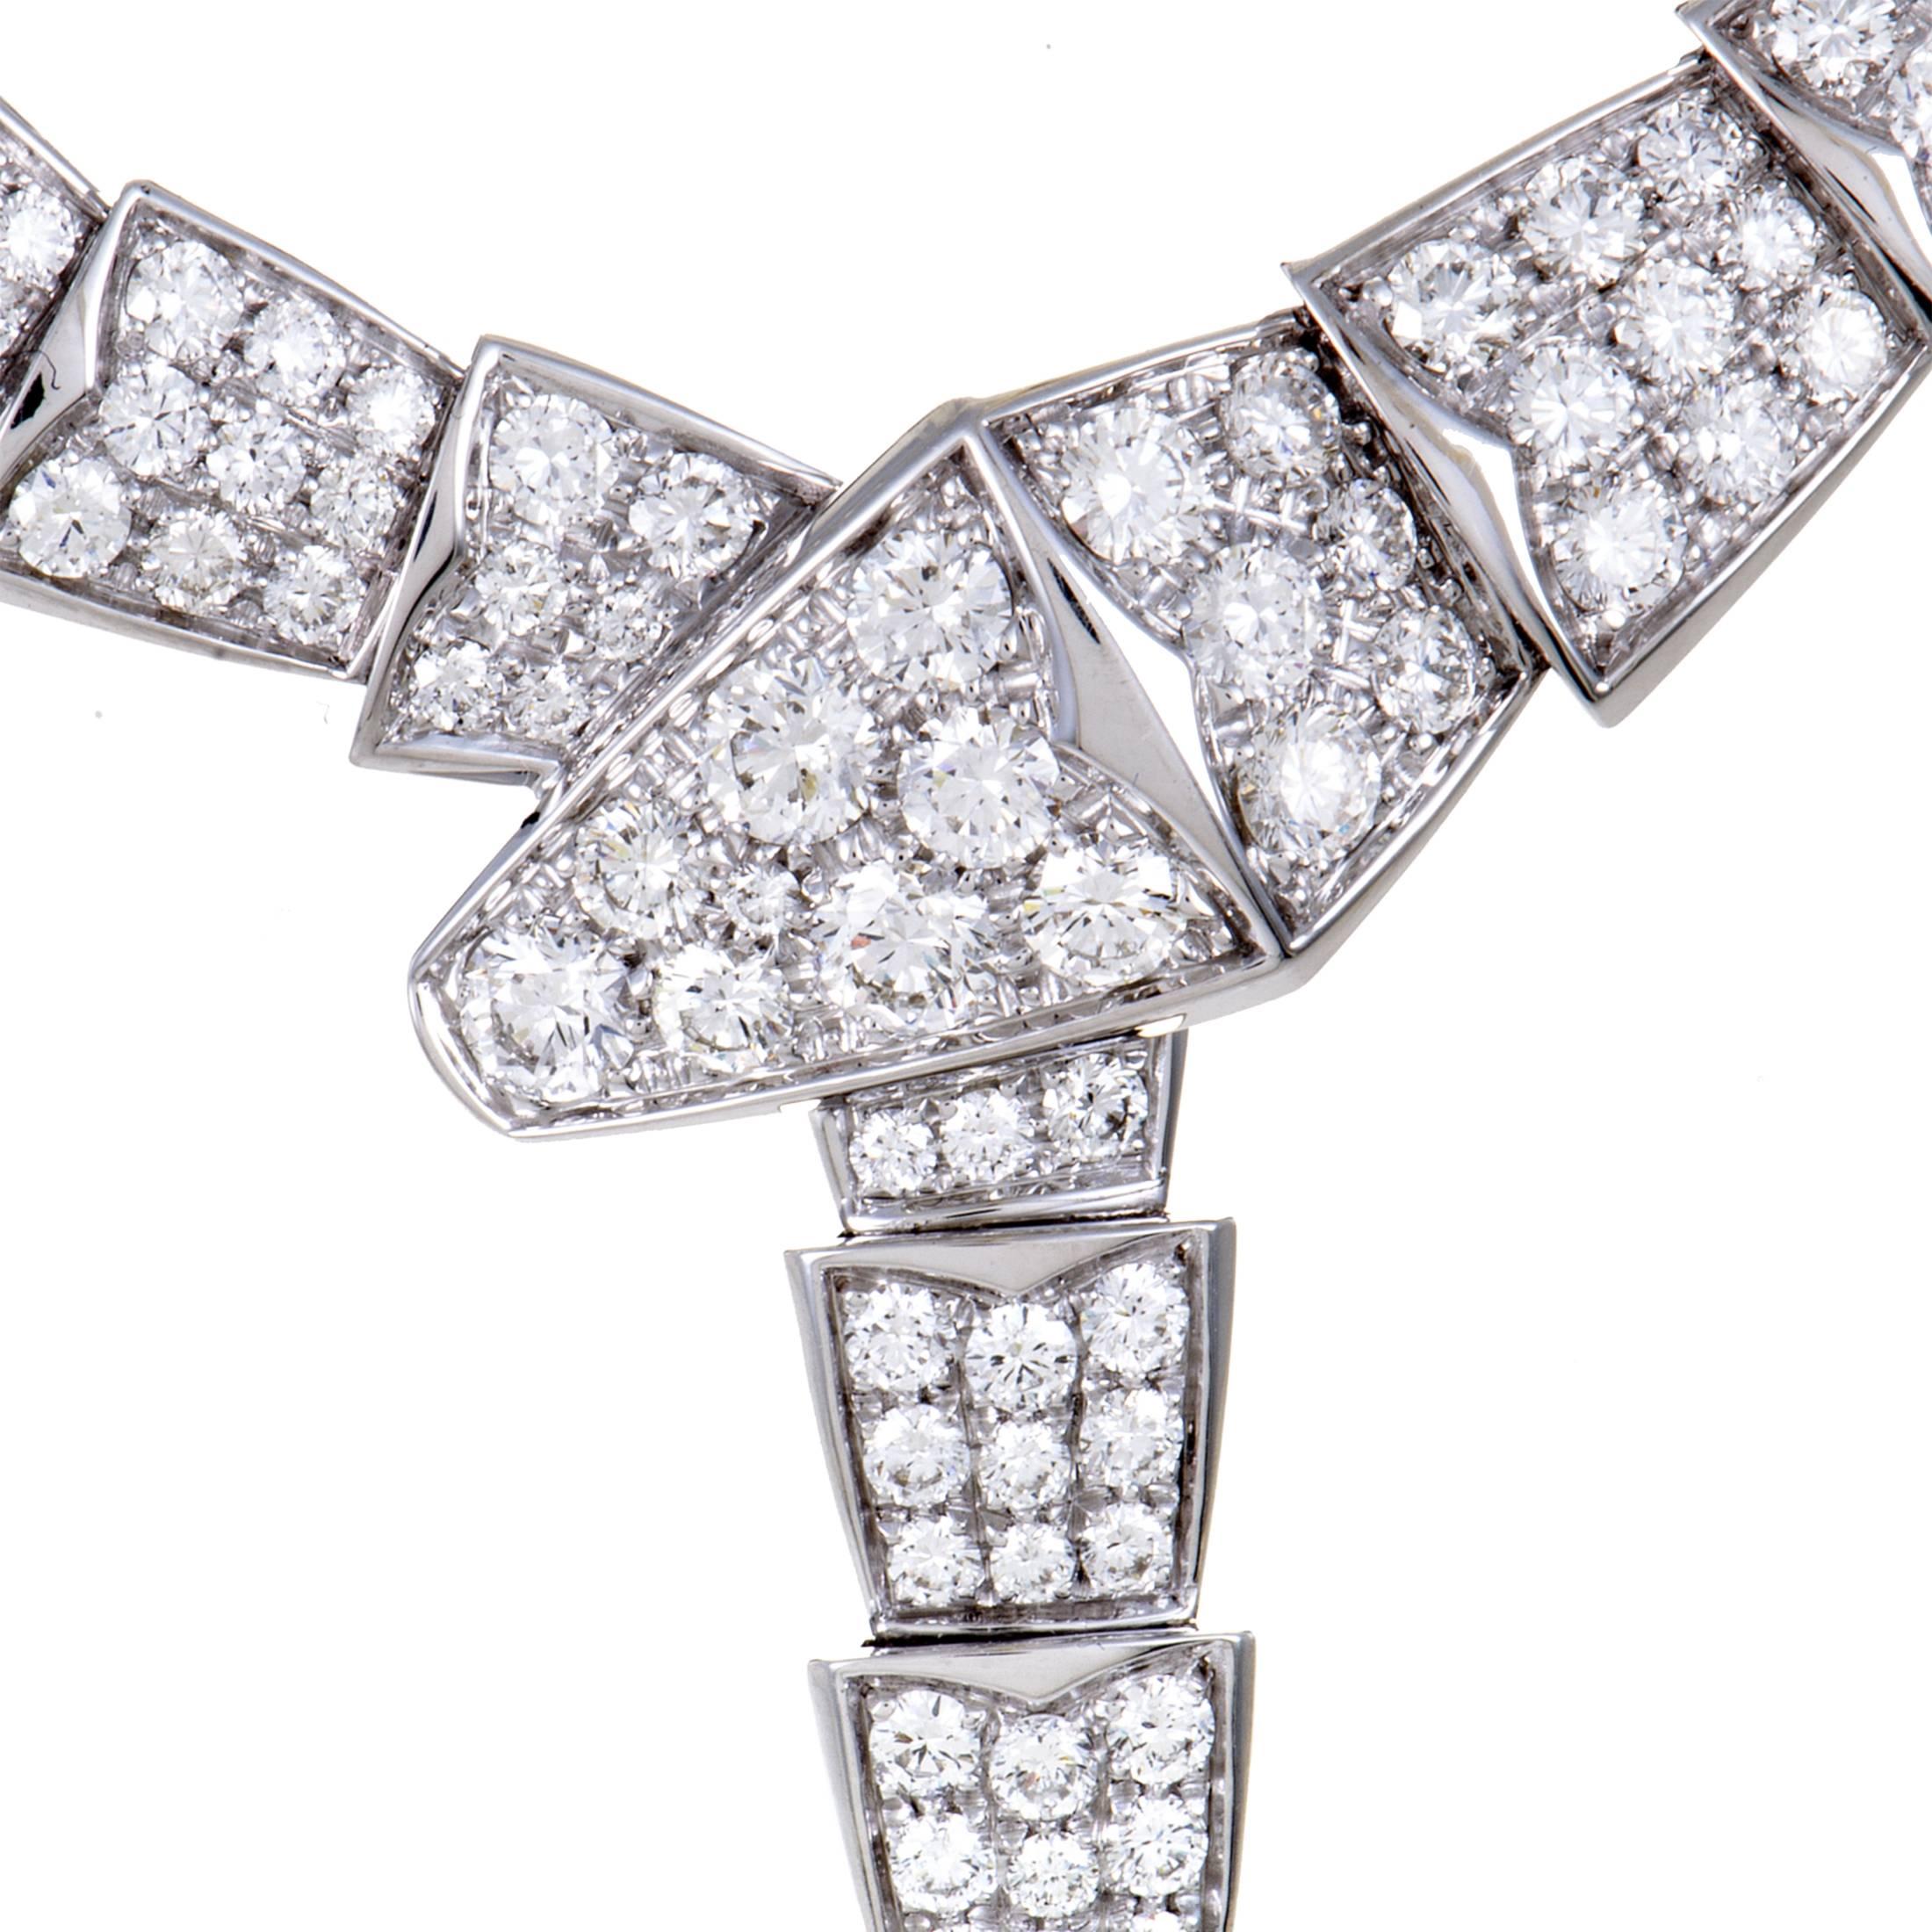 A brilliant full diamond pave is the hallmark of this extremely decadent and necklace from Bvlgari. Made from shining 18K white gold and set with a full pave of glistening white diamonds, this necklace is sure to stun all who behold it's splendor. 